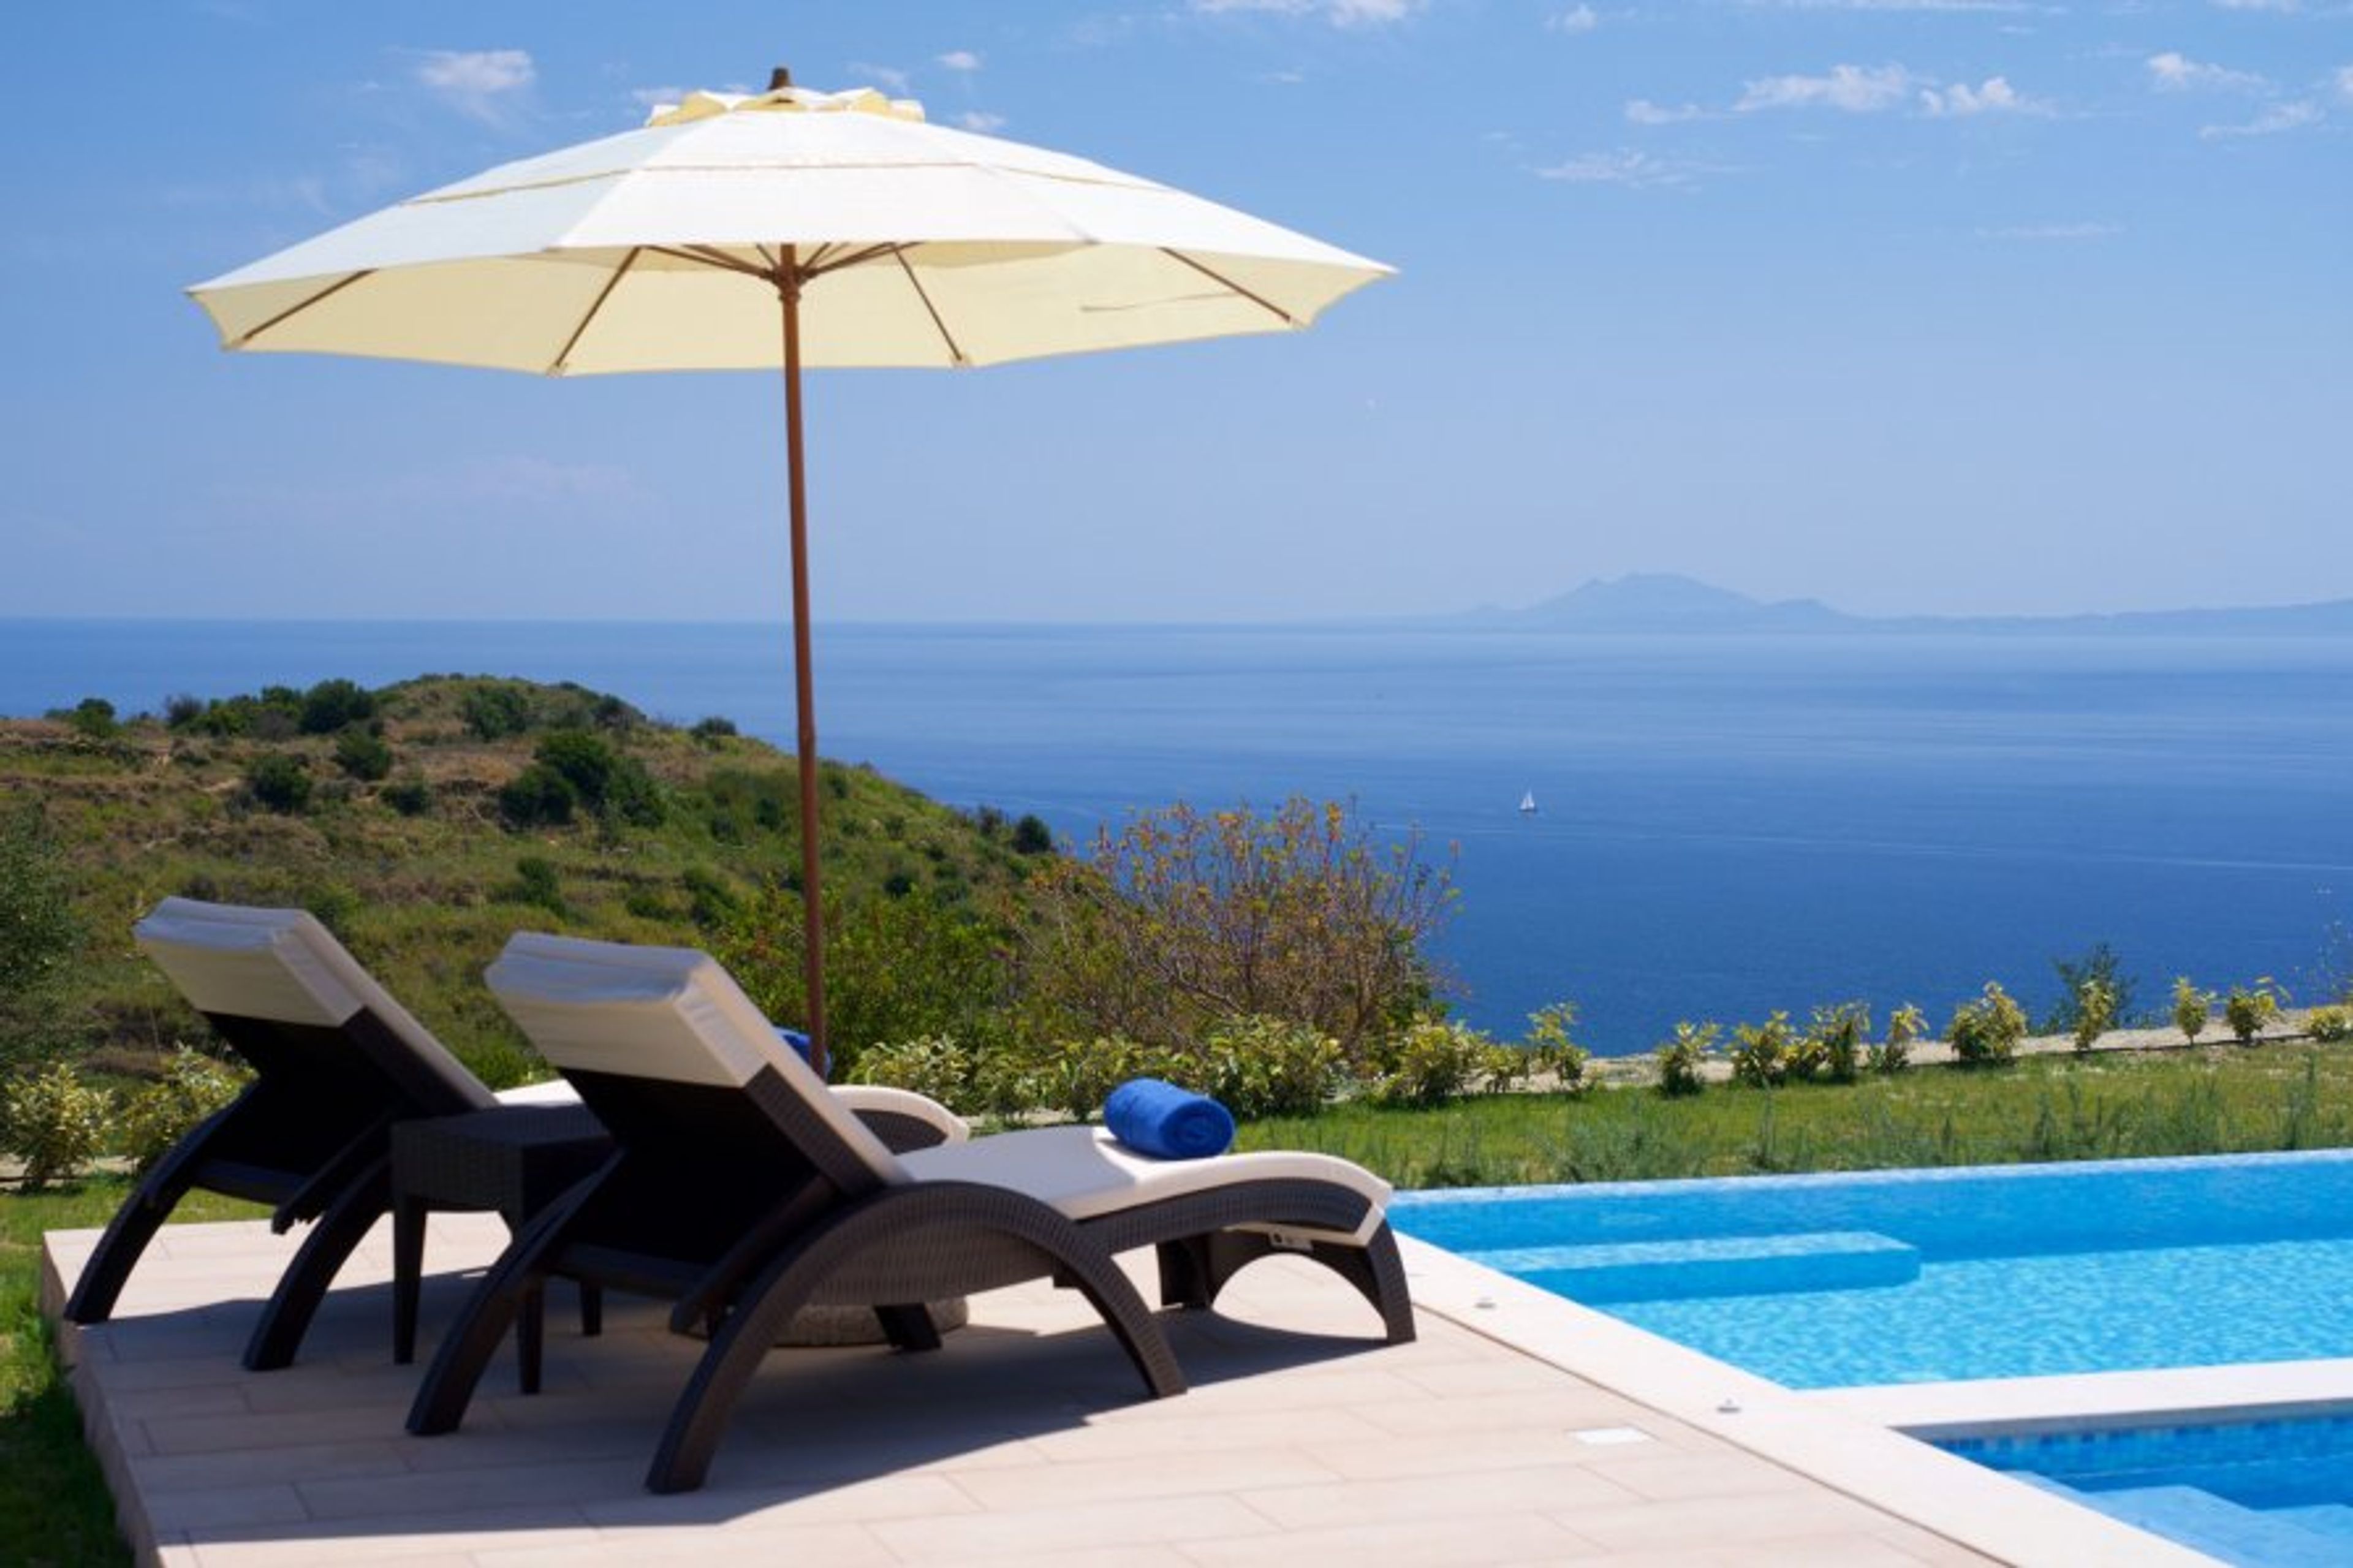 Plenty of sun loungers and the Jacuzzi offering stunning views